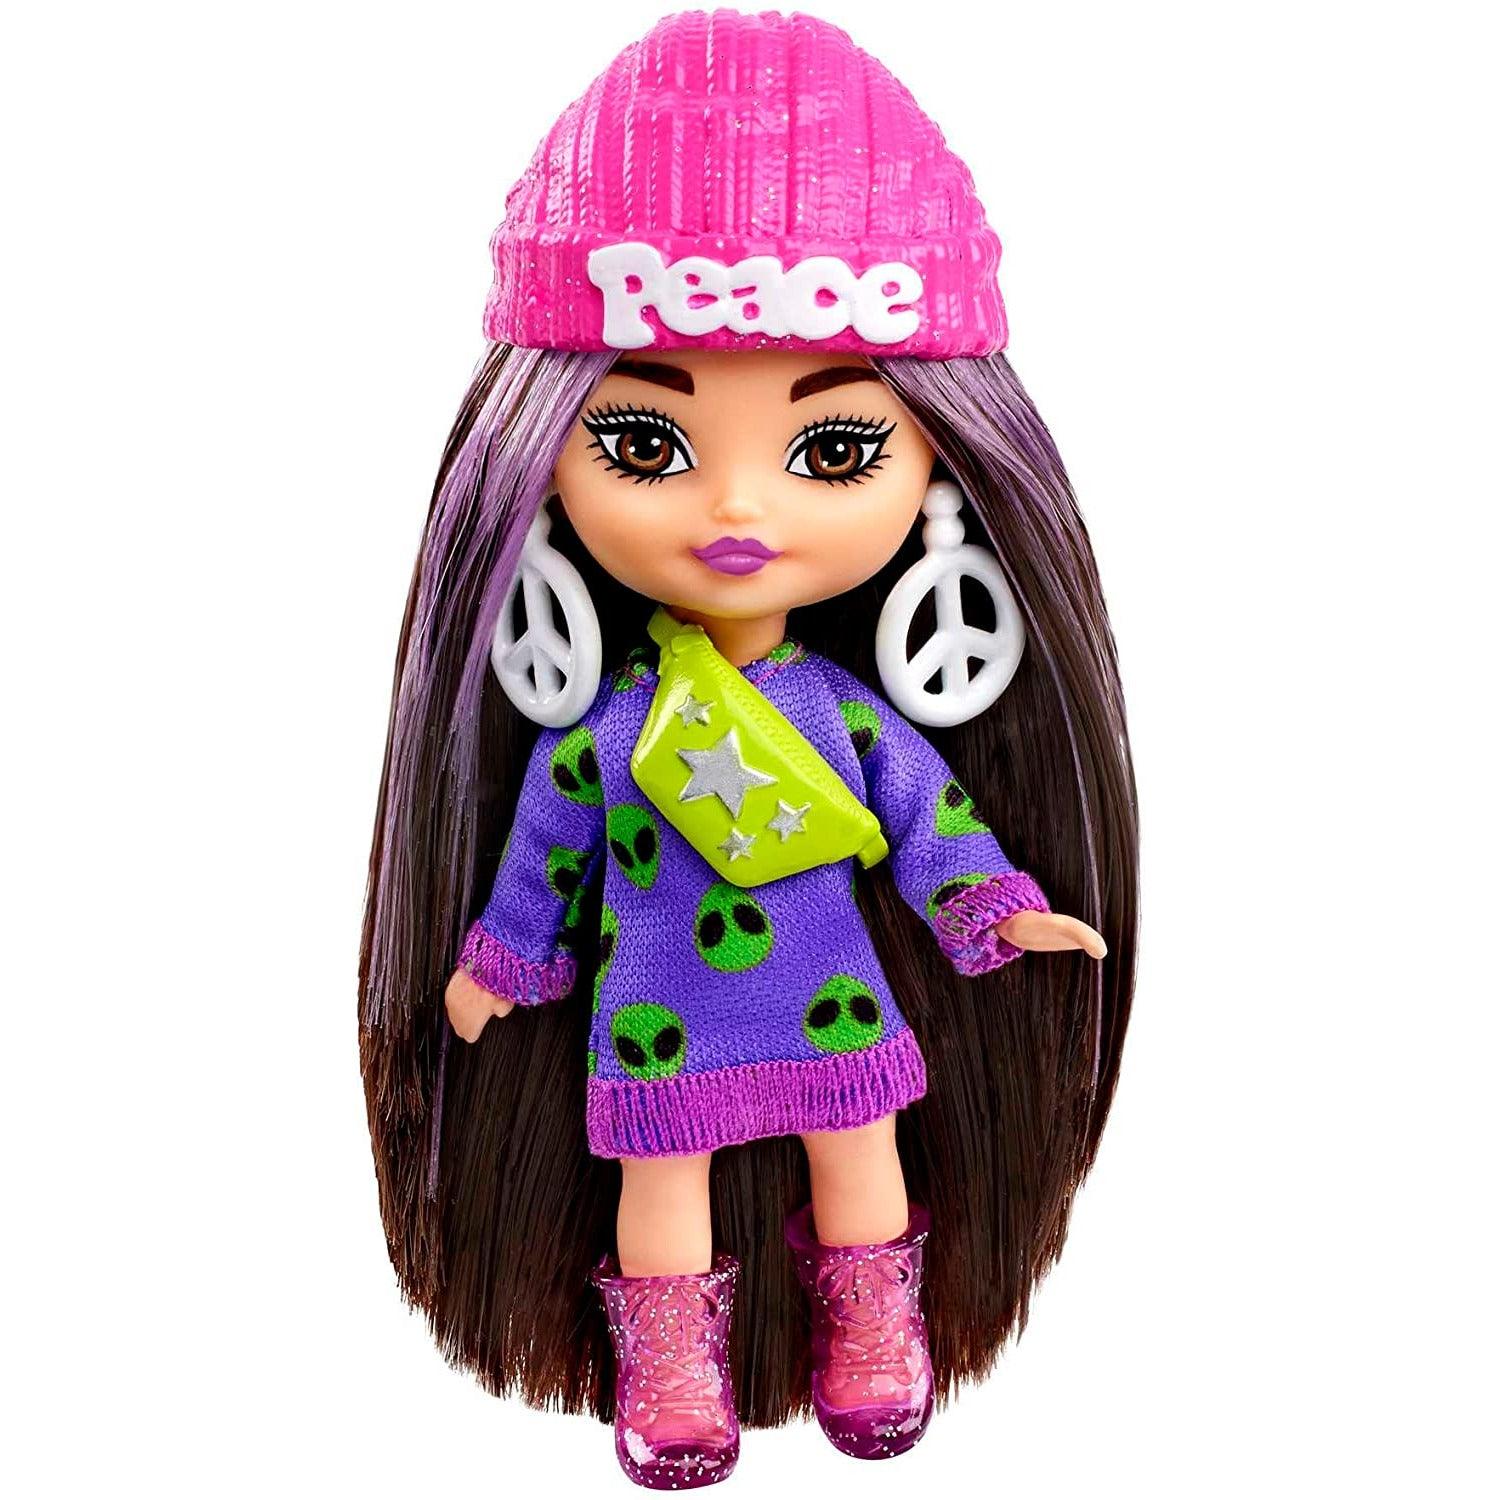 Barbie Extra Mini Minis Brunette Doll With Alien Sweater Dress, Peace Sign-Themed Clothes And Accessories - BumbleToys - 5-7 Years, Barbie, Barbie Extra, Dolls, Fashion Dolls & Accessories, Girls, Miniature Dolls & Accessories, OXE, Pre-Order